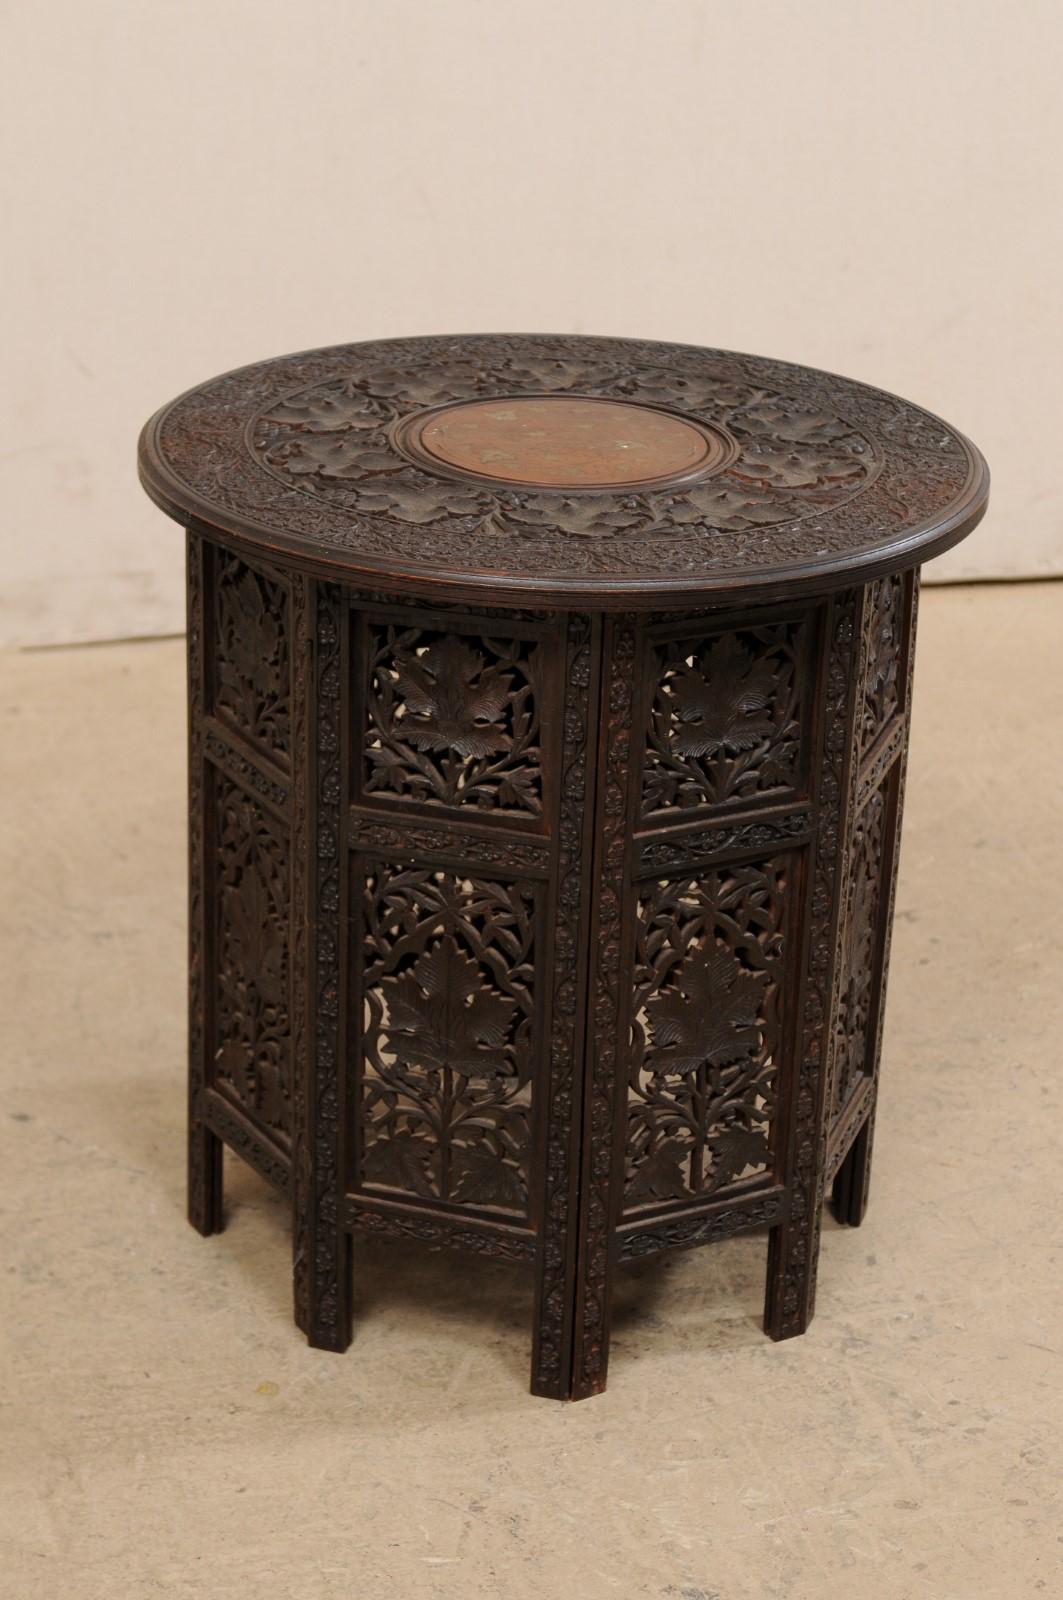 20th Century Anglo-Indian Carved-Wood Tea Table Top, Foldable for Storage